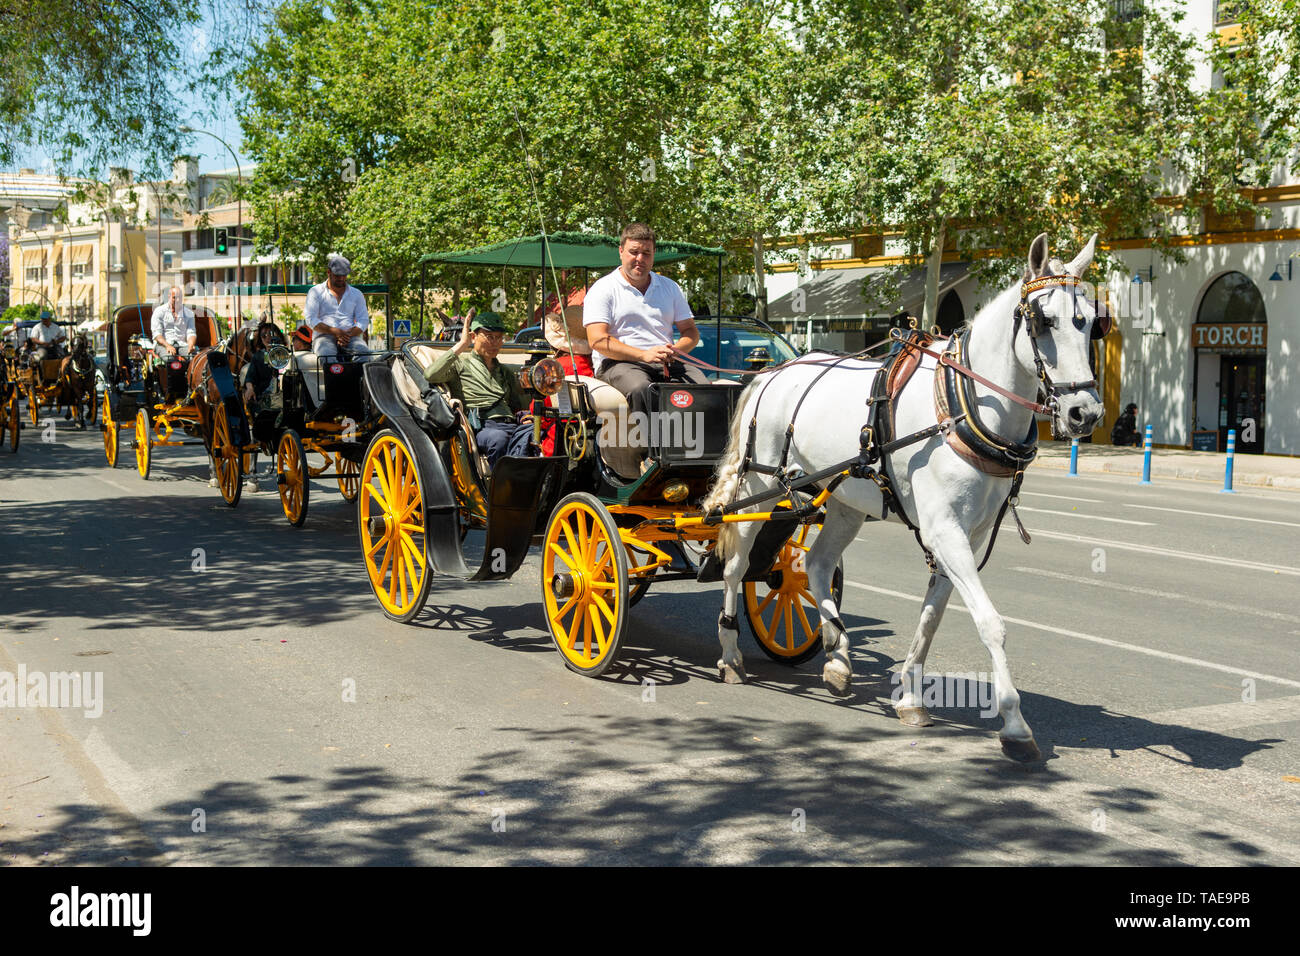 Horse drawn carriages taking tourists on a sight-seeing tour of Seville, Andalusia region, Spain Stock Photo